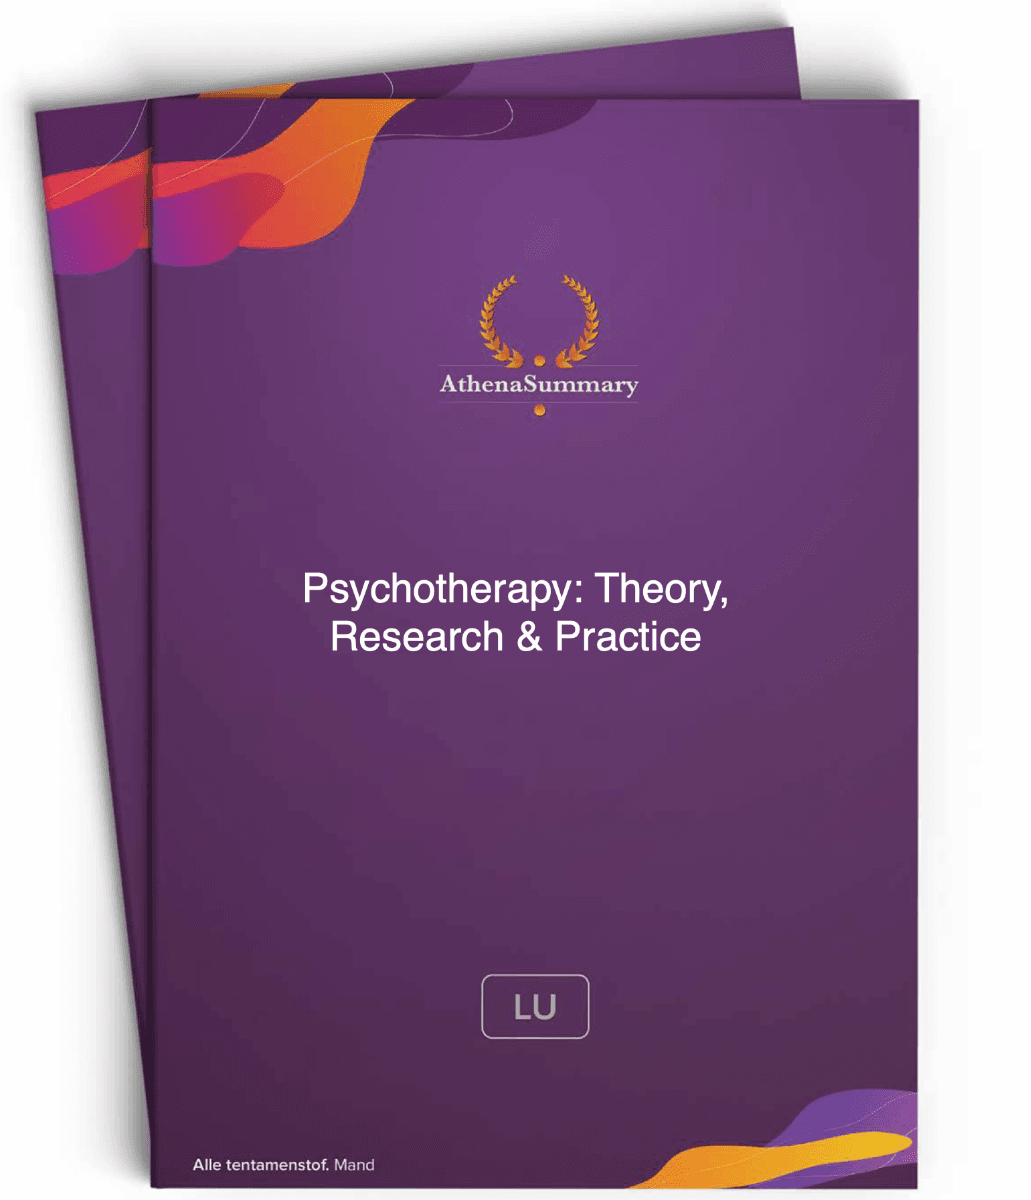 Literature Summary - Psychotherapy: Theory, Research & Practice